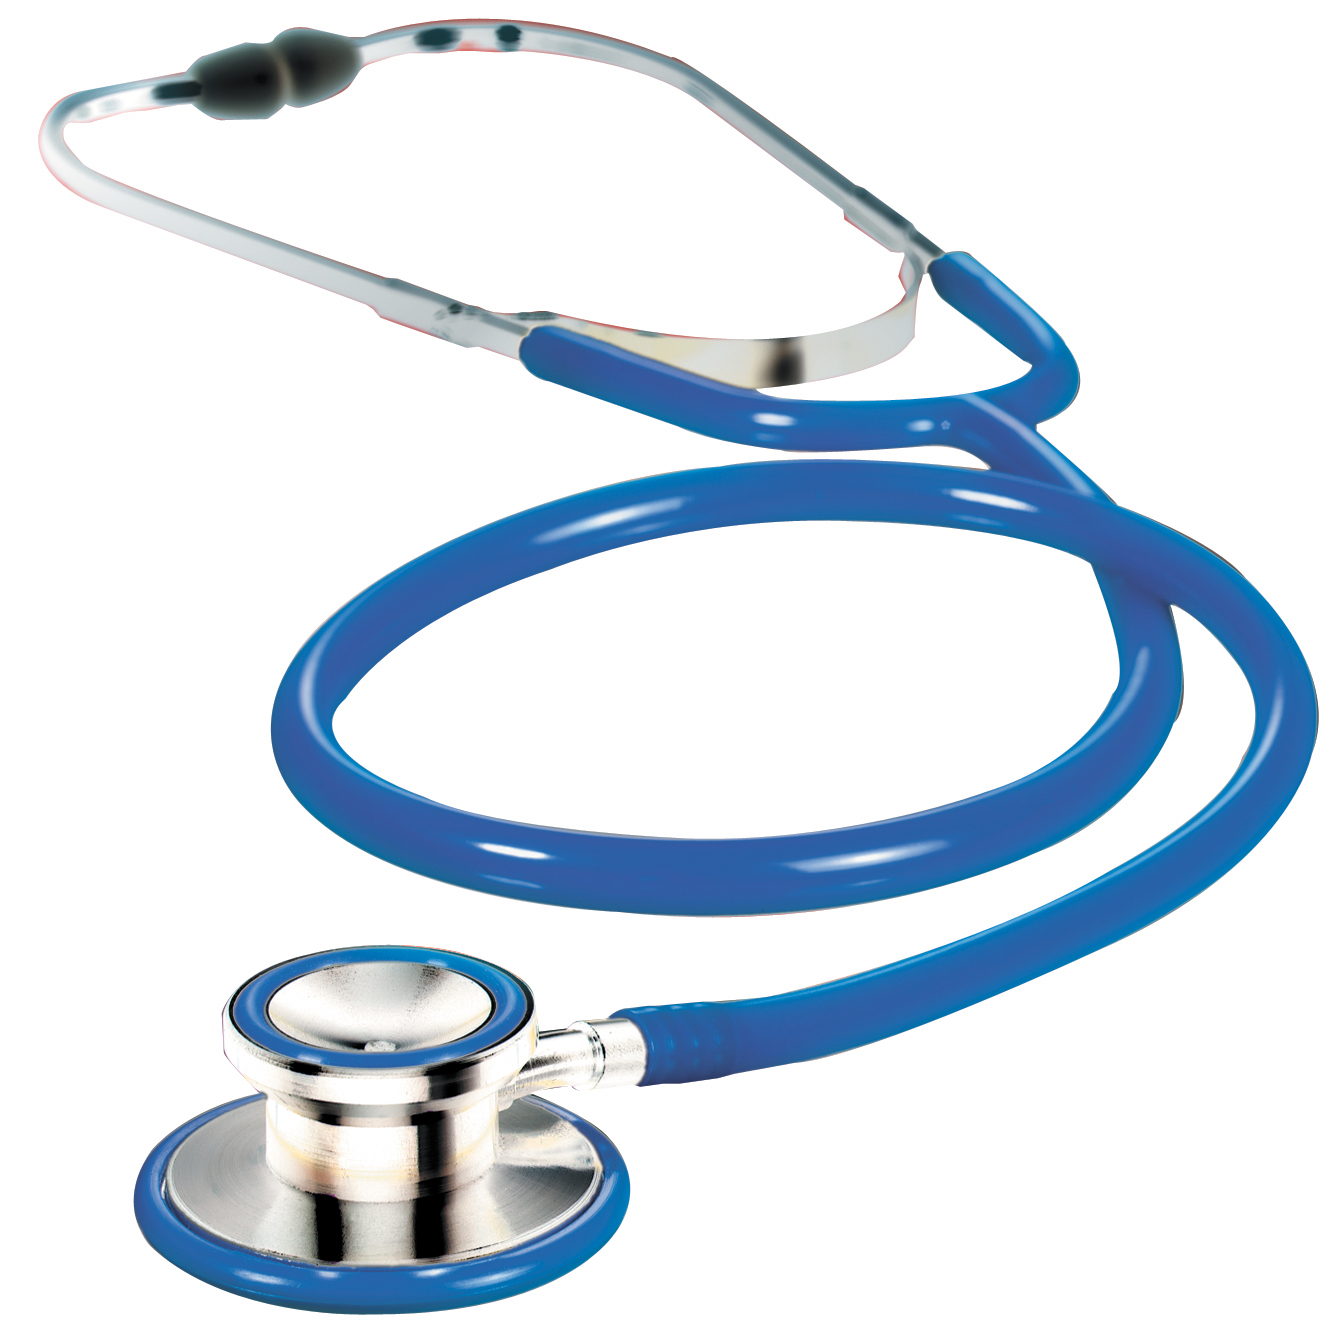 Stethoscope on a white background free image download